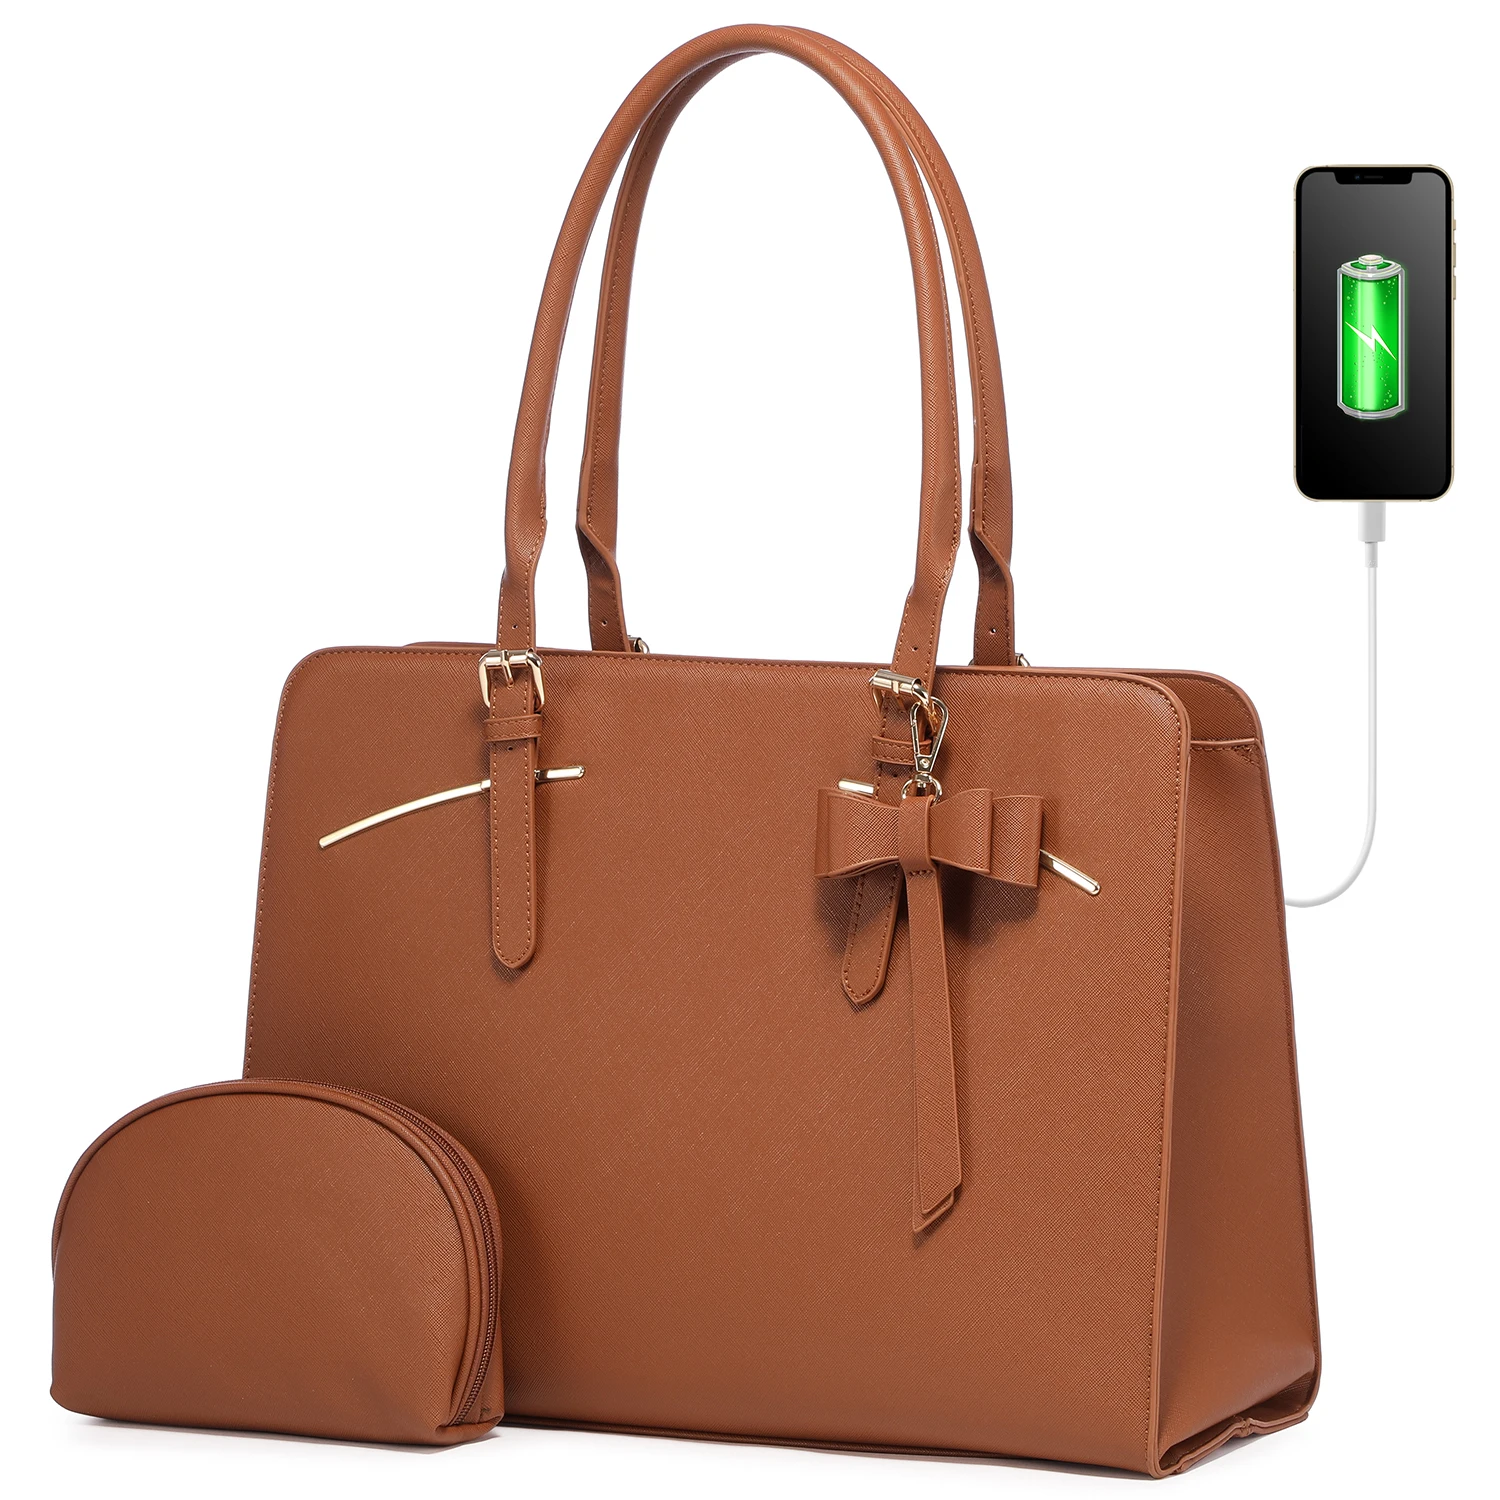 

LOVEVOOK New Style Fashion Ladies Handbag Set Office Work Shoulder Tote Computer Bags Pu Leather Women Laptop Briefcase with USB